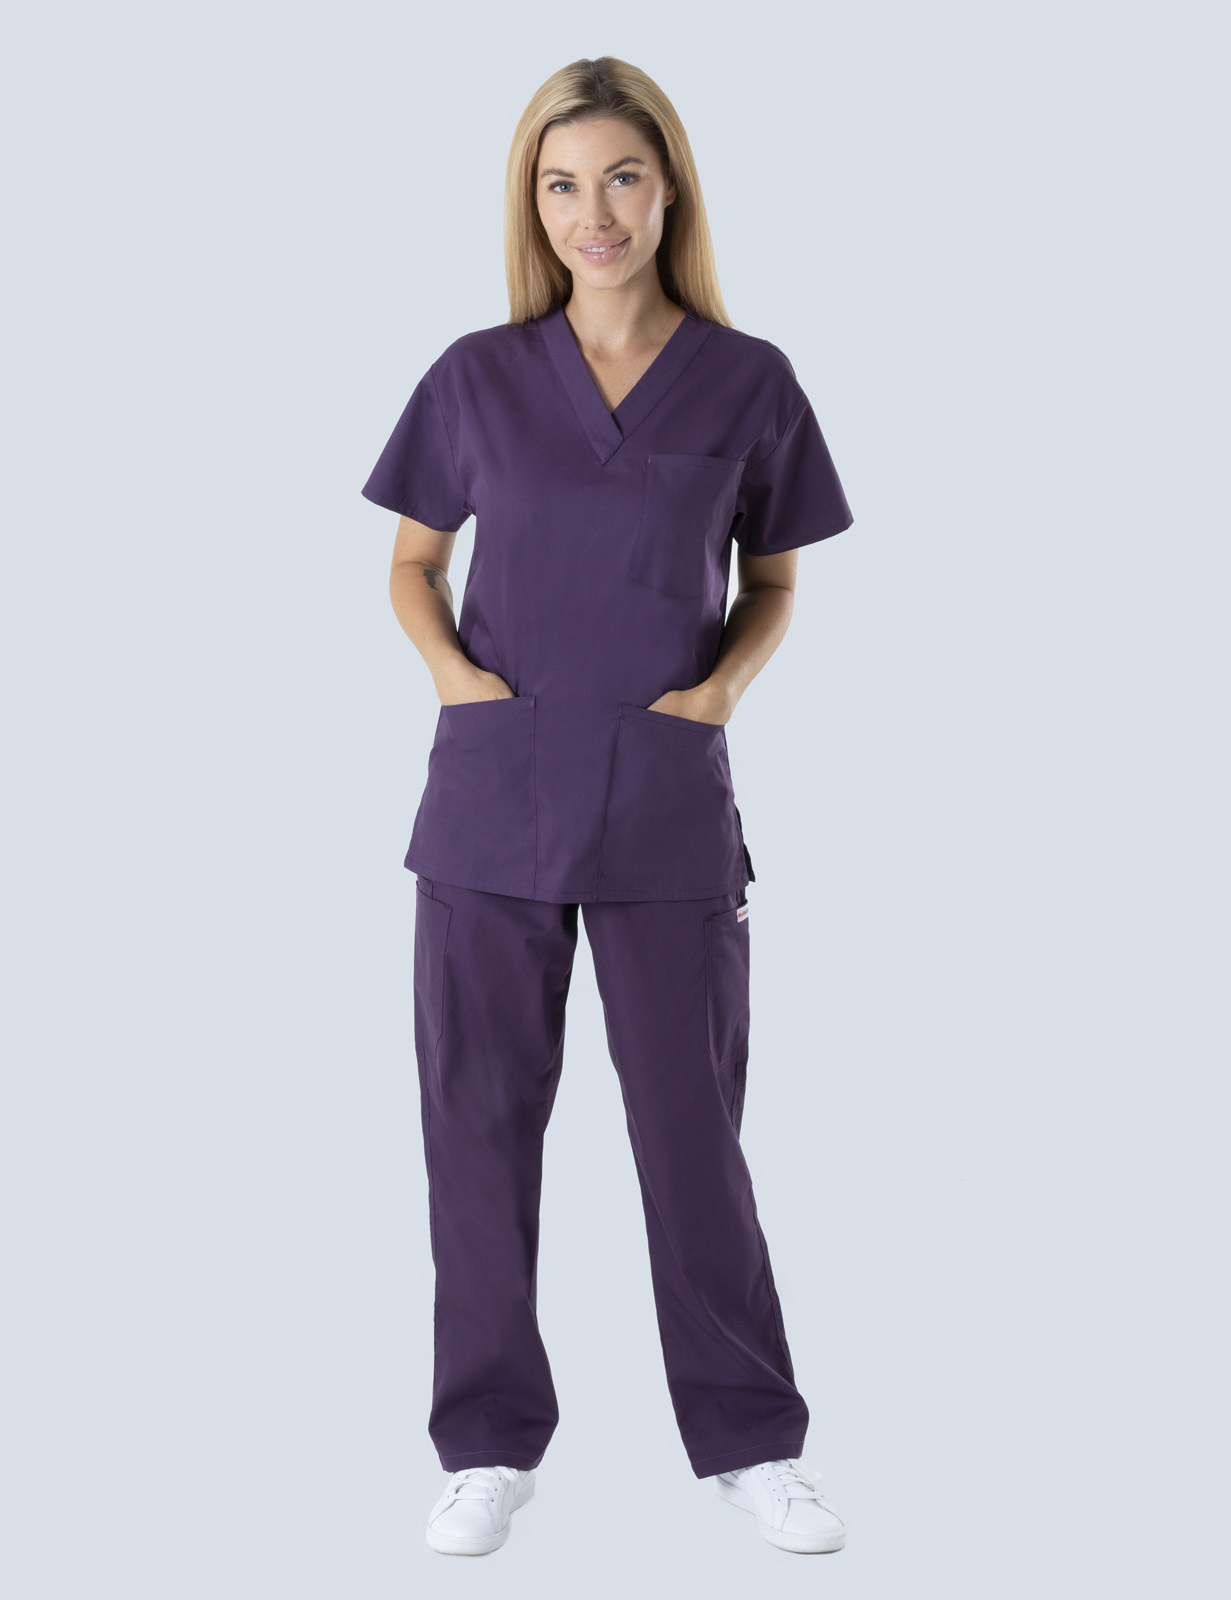 Caboolture Hospital - ED RN (4 Pocket Scrub Top and Cargo Pants in Aubergine incl Logos)